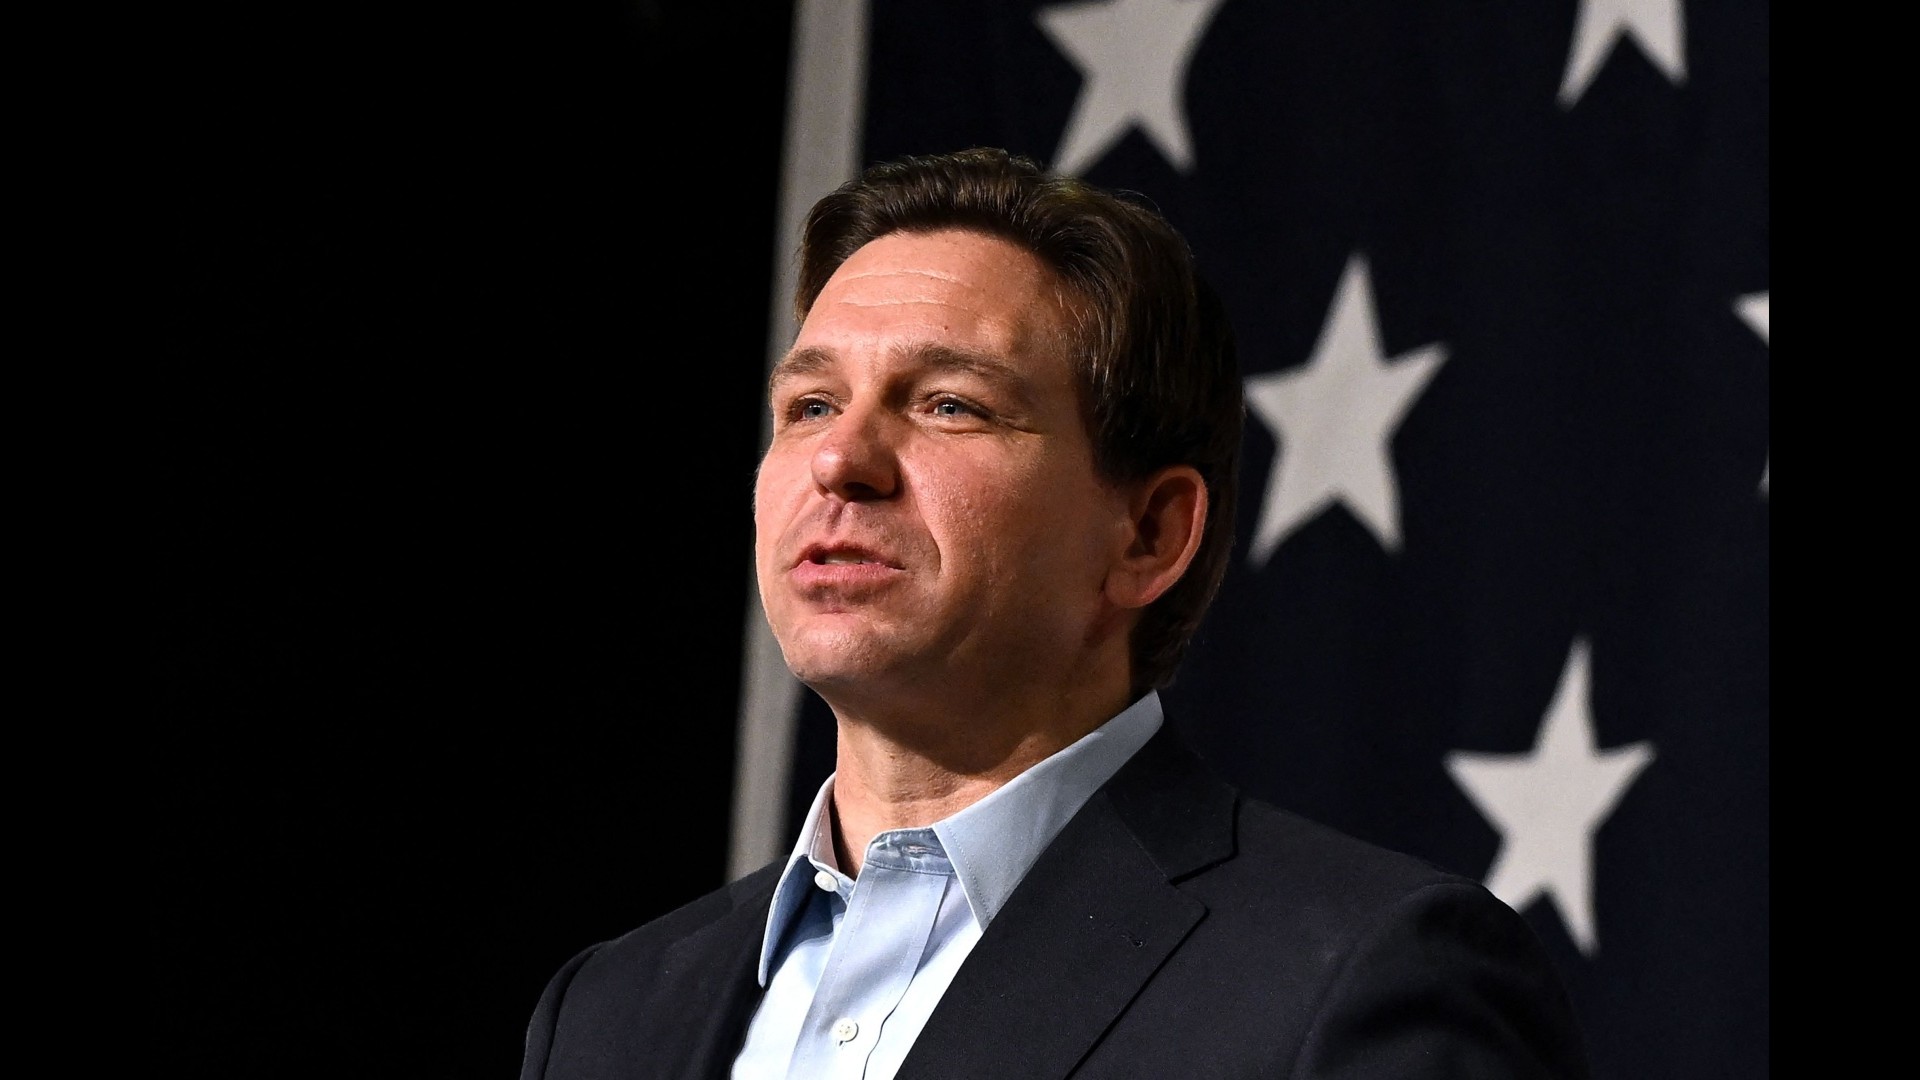 Ron DeSantis sets target on Trump while campaigning in Iowa